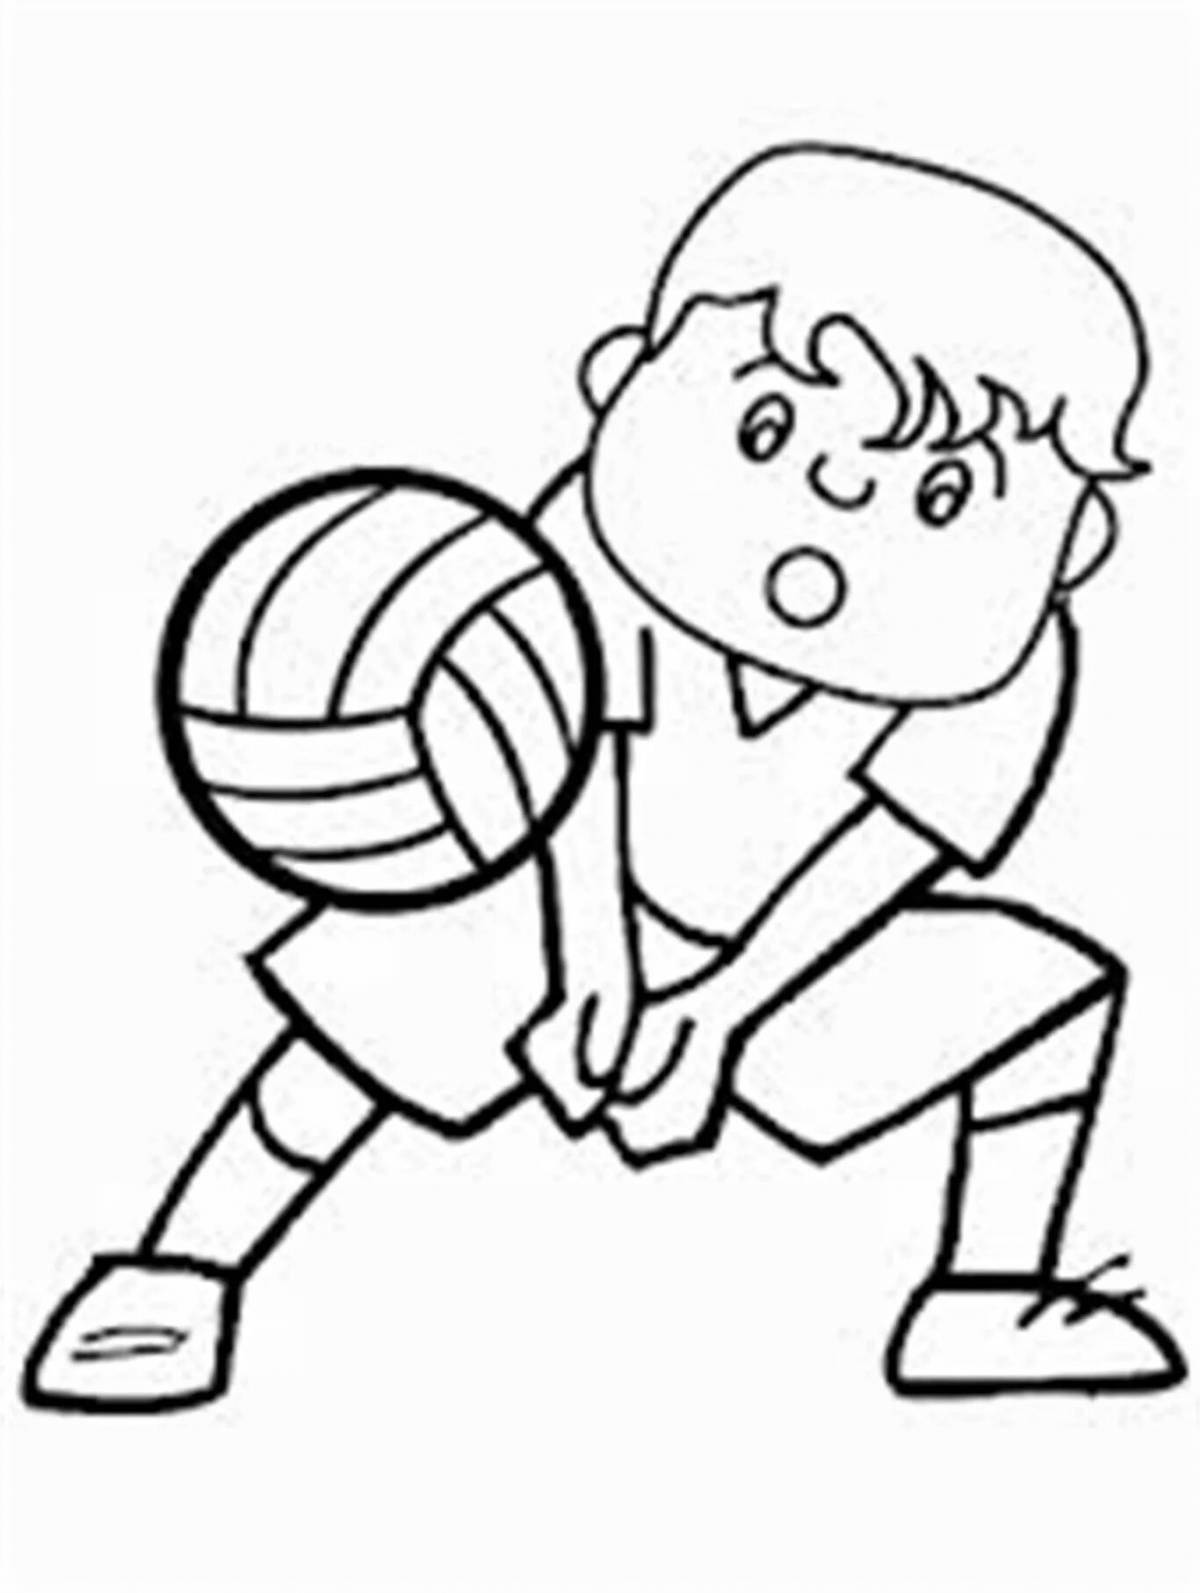 Entertaining coloring book athletes of different sports for children